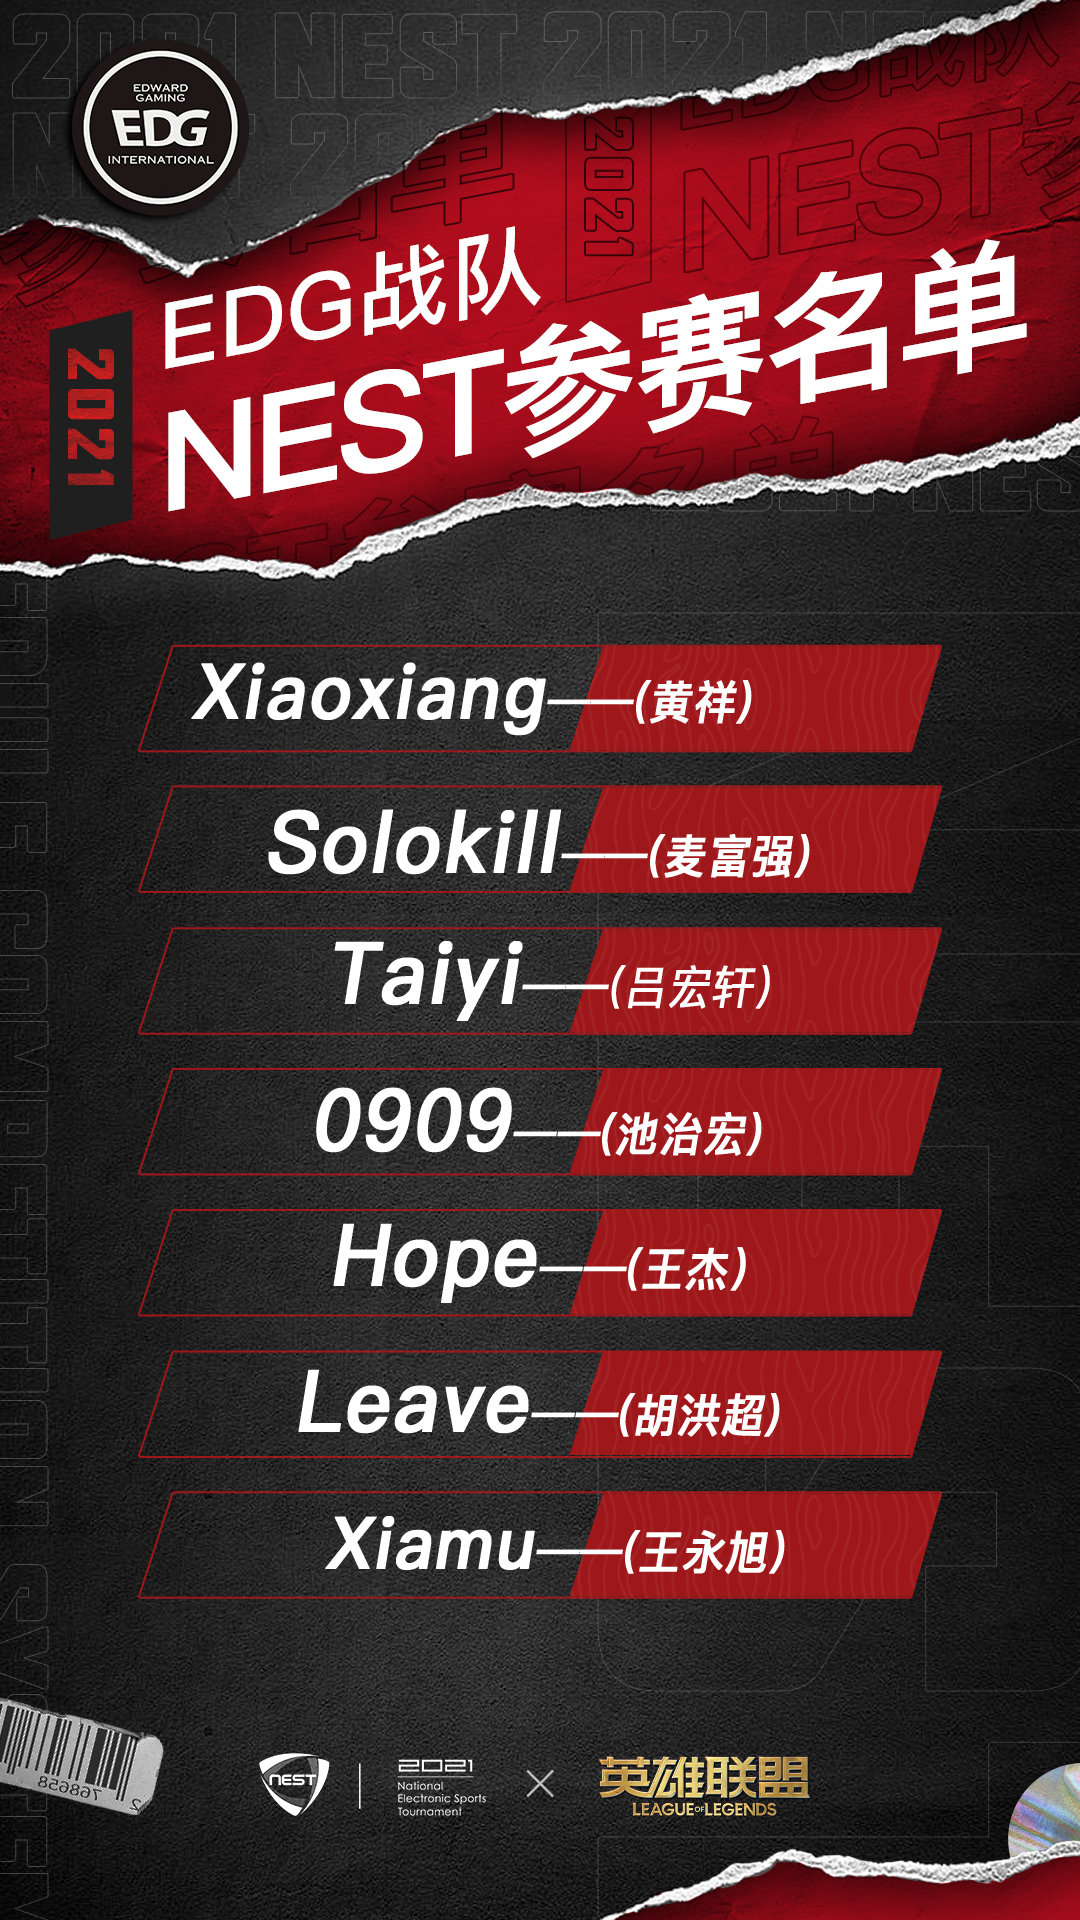 EDG参加NEST名单：Hope、Xiaoxiang